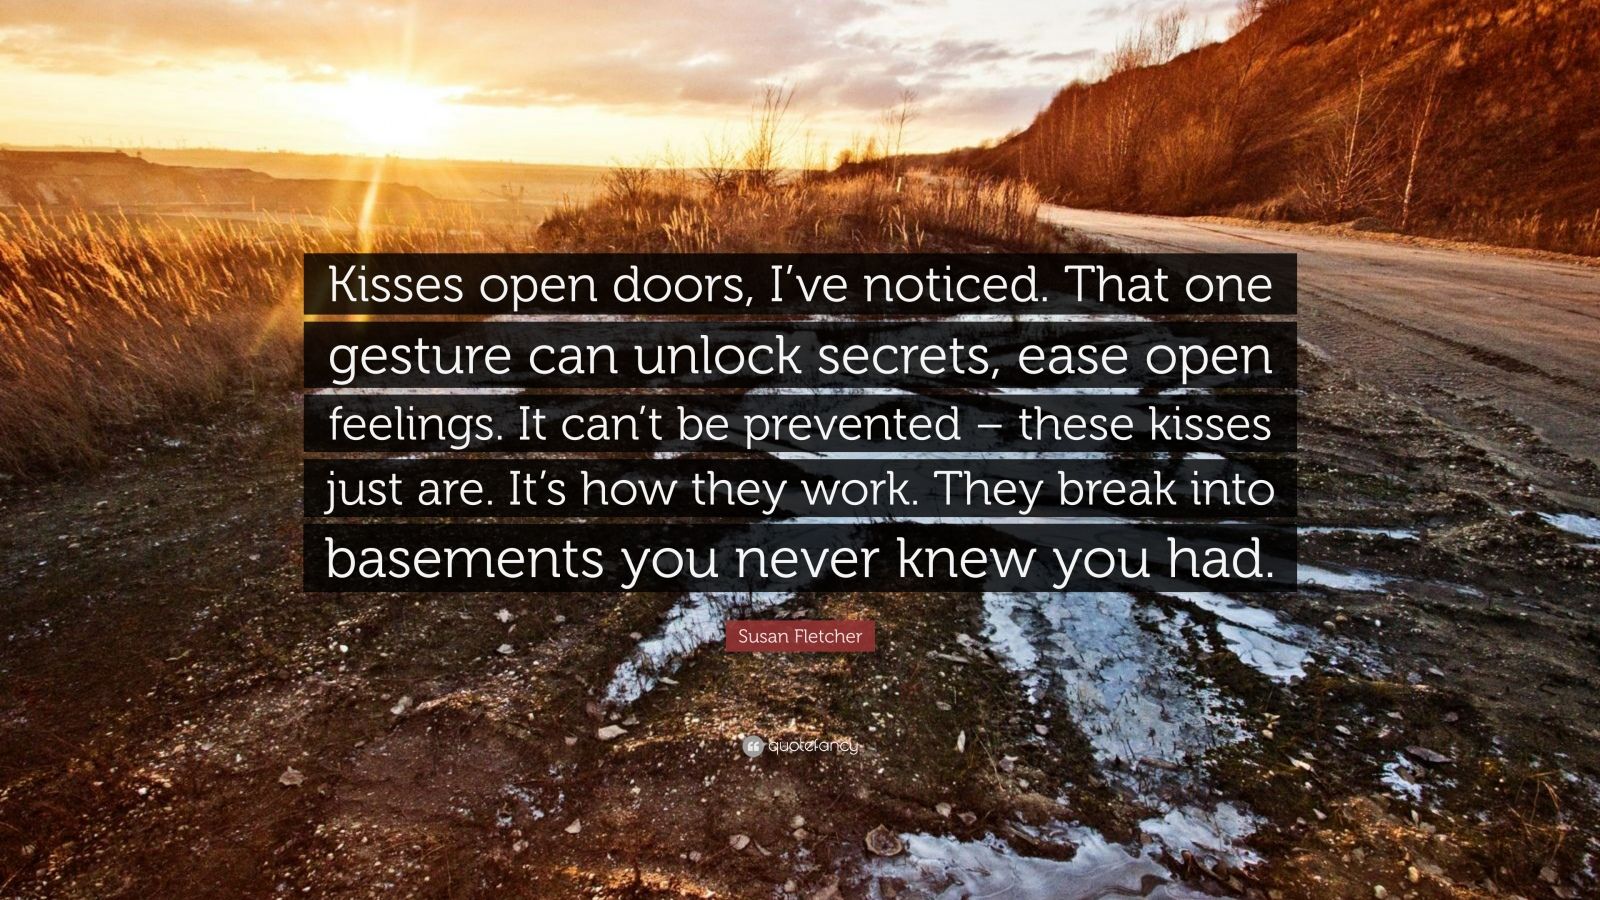 Susan Fletcher Quote: “Kisses open doors, I've noticed. That one gesture can  unlock secrets, ease open feelings. It can't be prevented – these ”